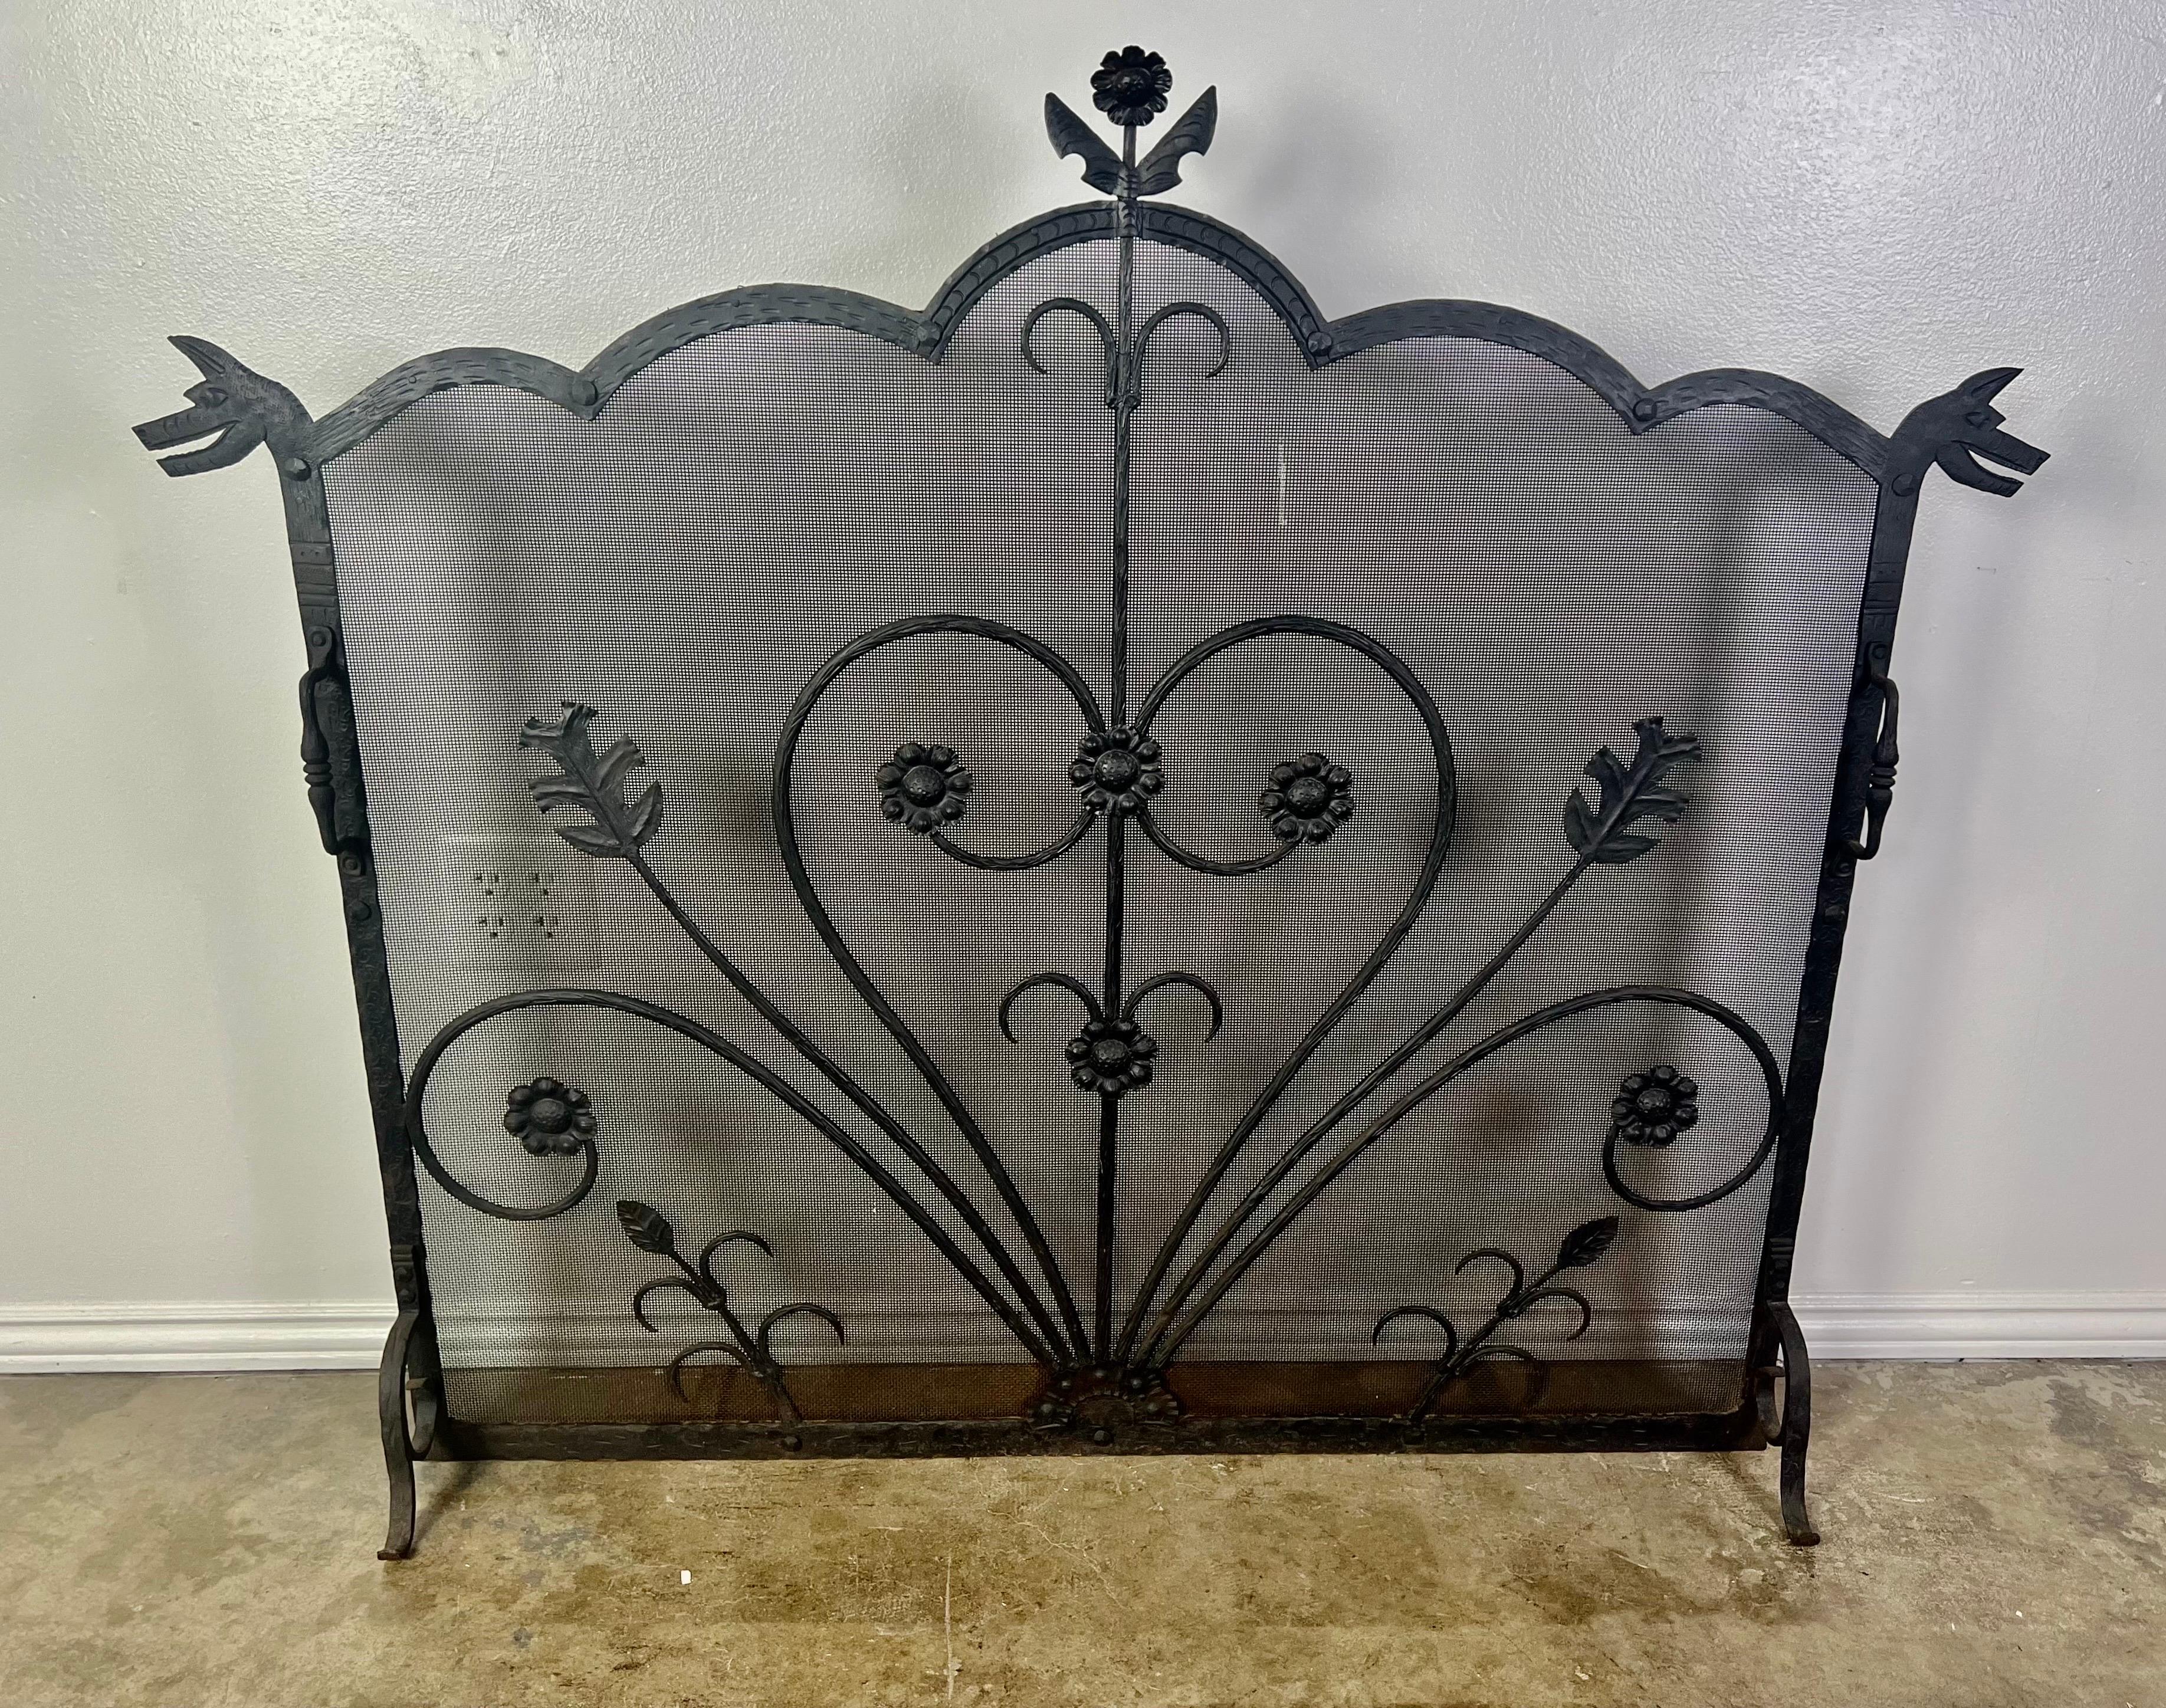 Large fireplace screen with dog handles and wrought iron frame. Decorated with hearts and flowers.